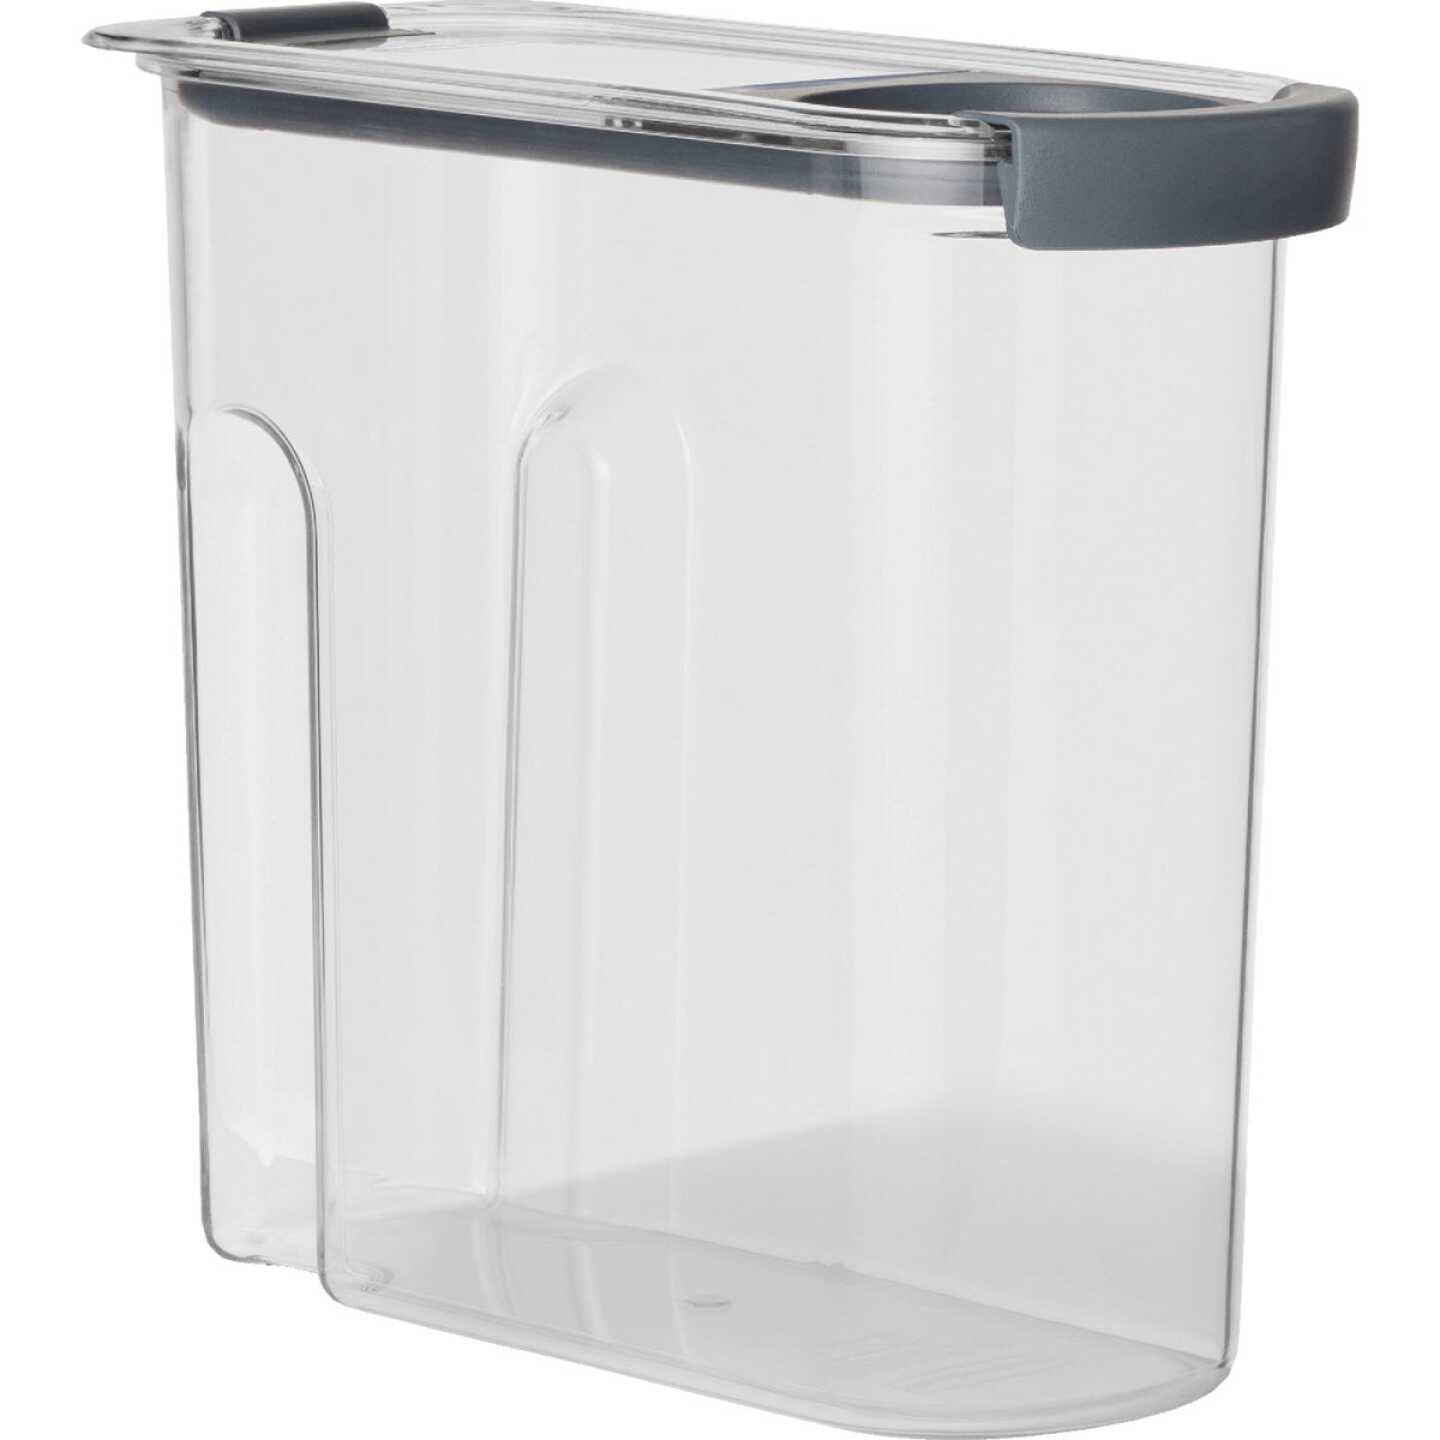 Rubbermaid Brilliance 18 Cup Cereal Pantry Airtight Food Storage Container  - Gillman Home Center